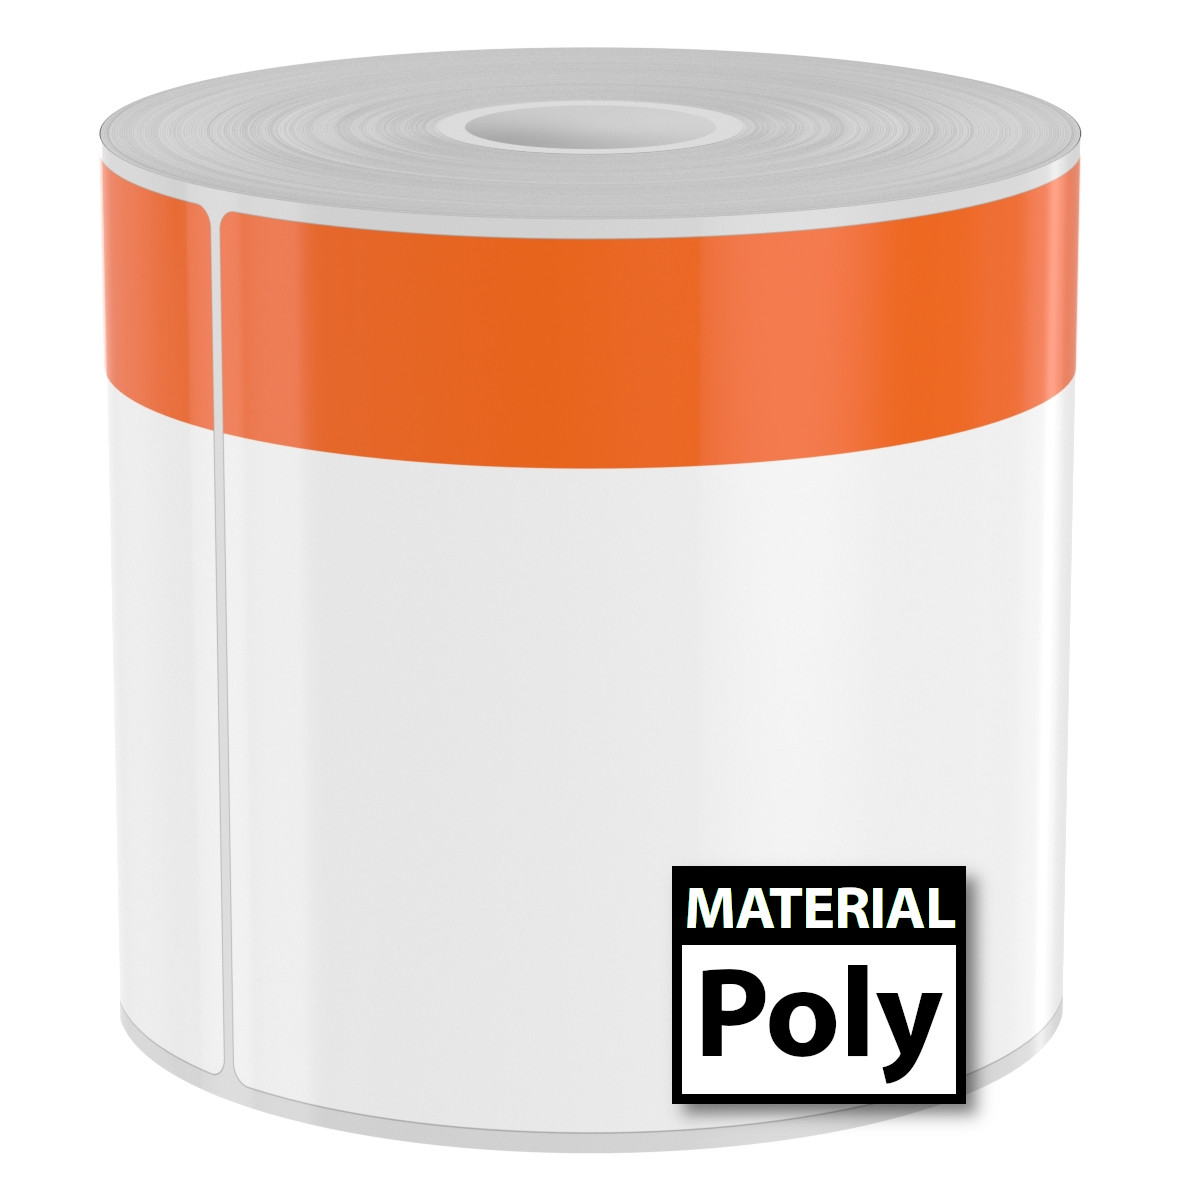 250 4in x 6in High-Performance Poly Arc Flash Labels with Orange Header